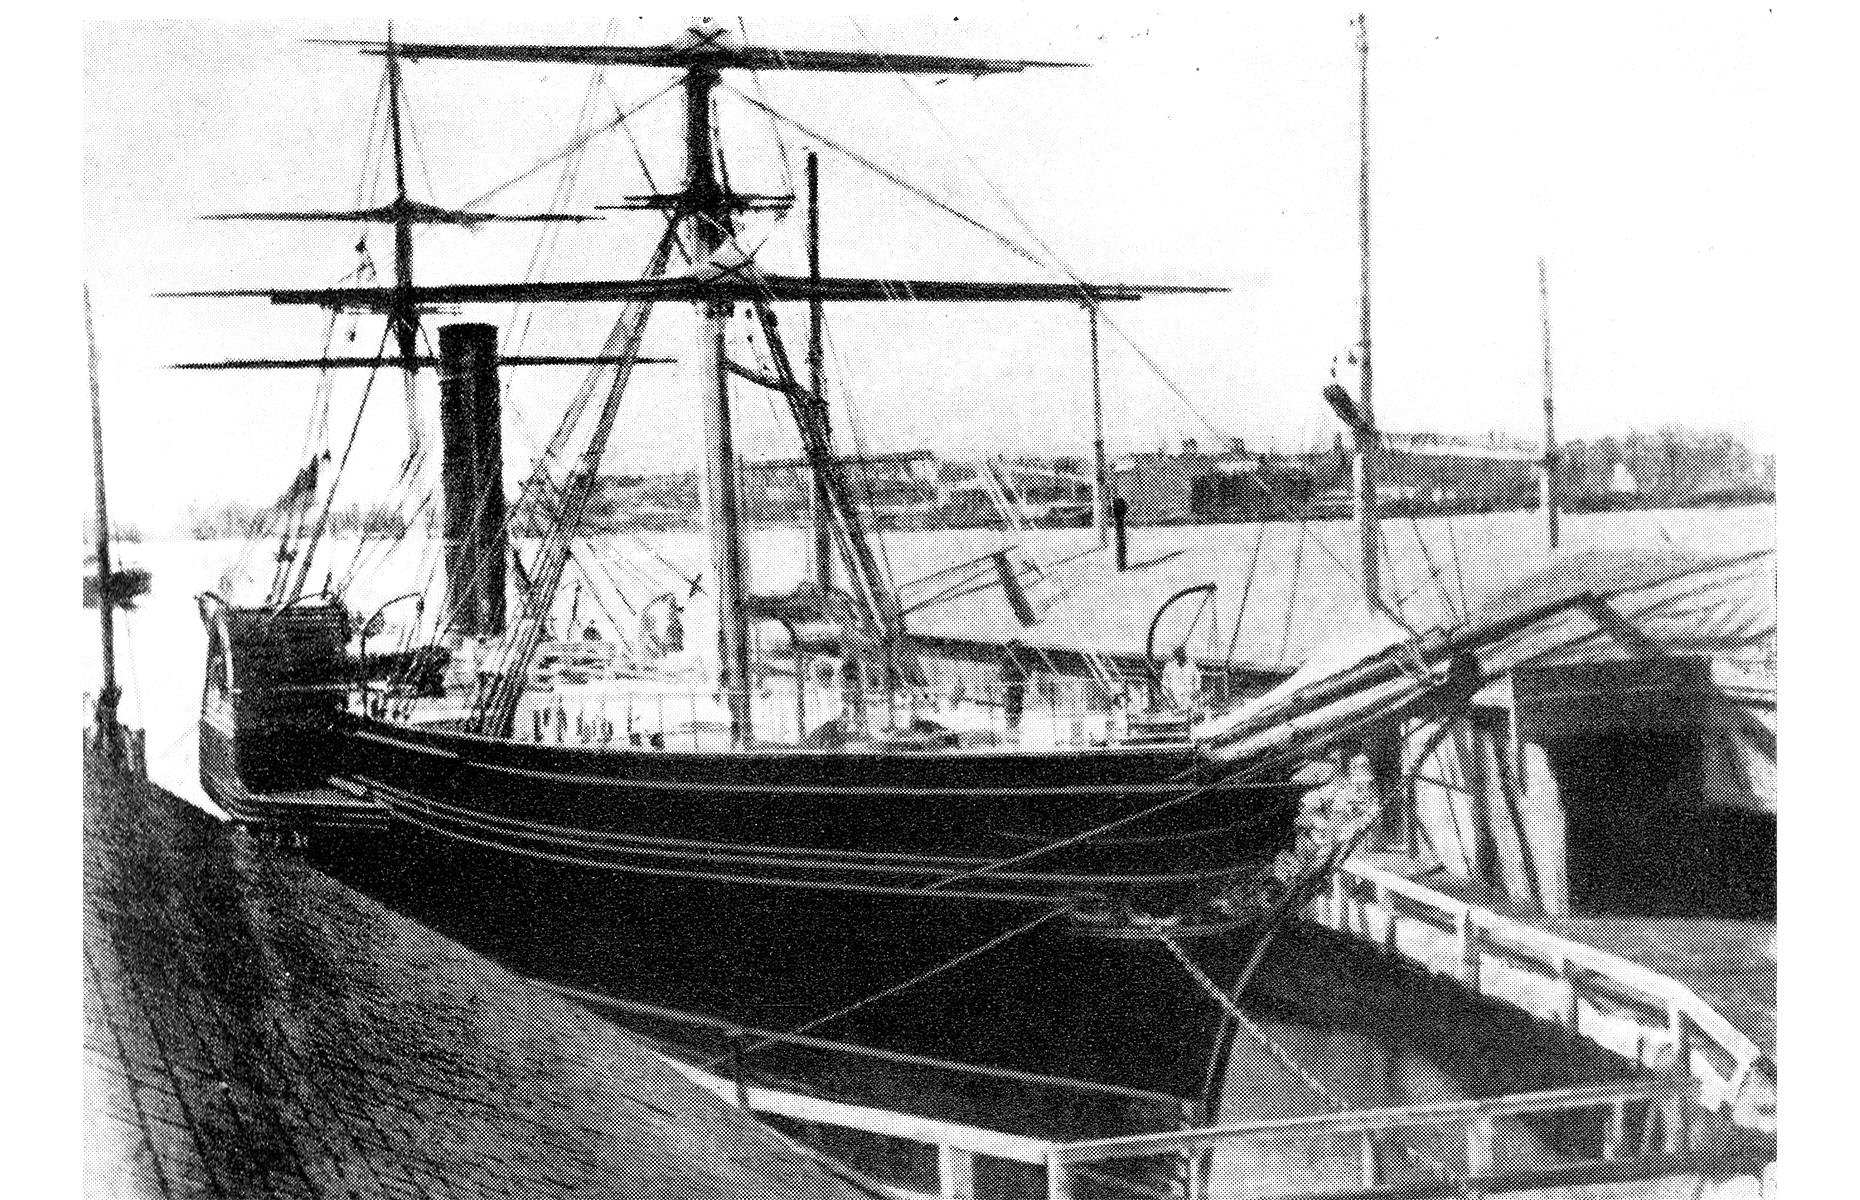 This decade also saw some of the biggest names in cruising sail onto the scene. The Cunard Line was founded in 1840, boasting an impressive fleet of steam-powered ships and whisking the likes of Charles Dickens to destinations such as Boston. Pictured here, in 1848, is Europa, one of Cunard's early Atlantic ships. The White Star Line, the operator of the famously ill-fated Titanic, was also founded in 1845.